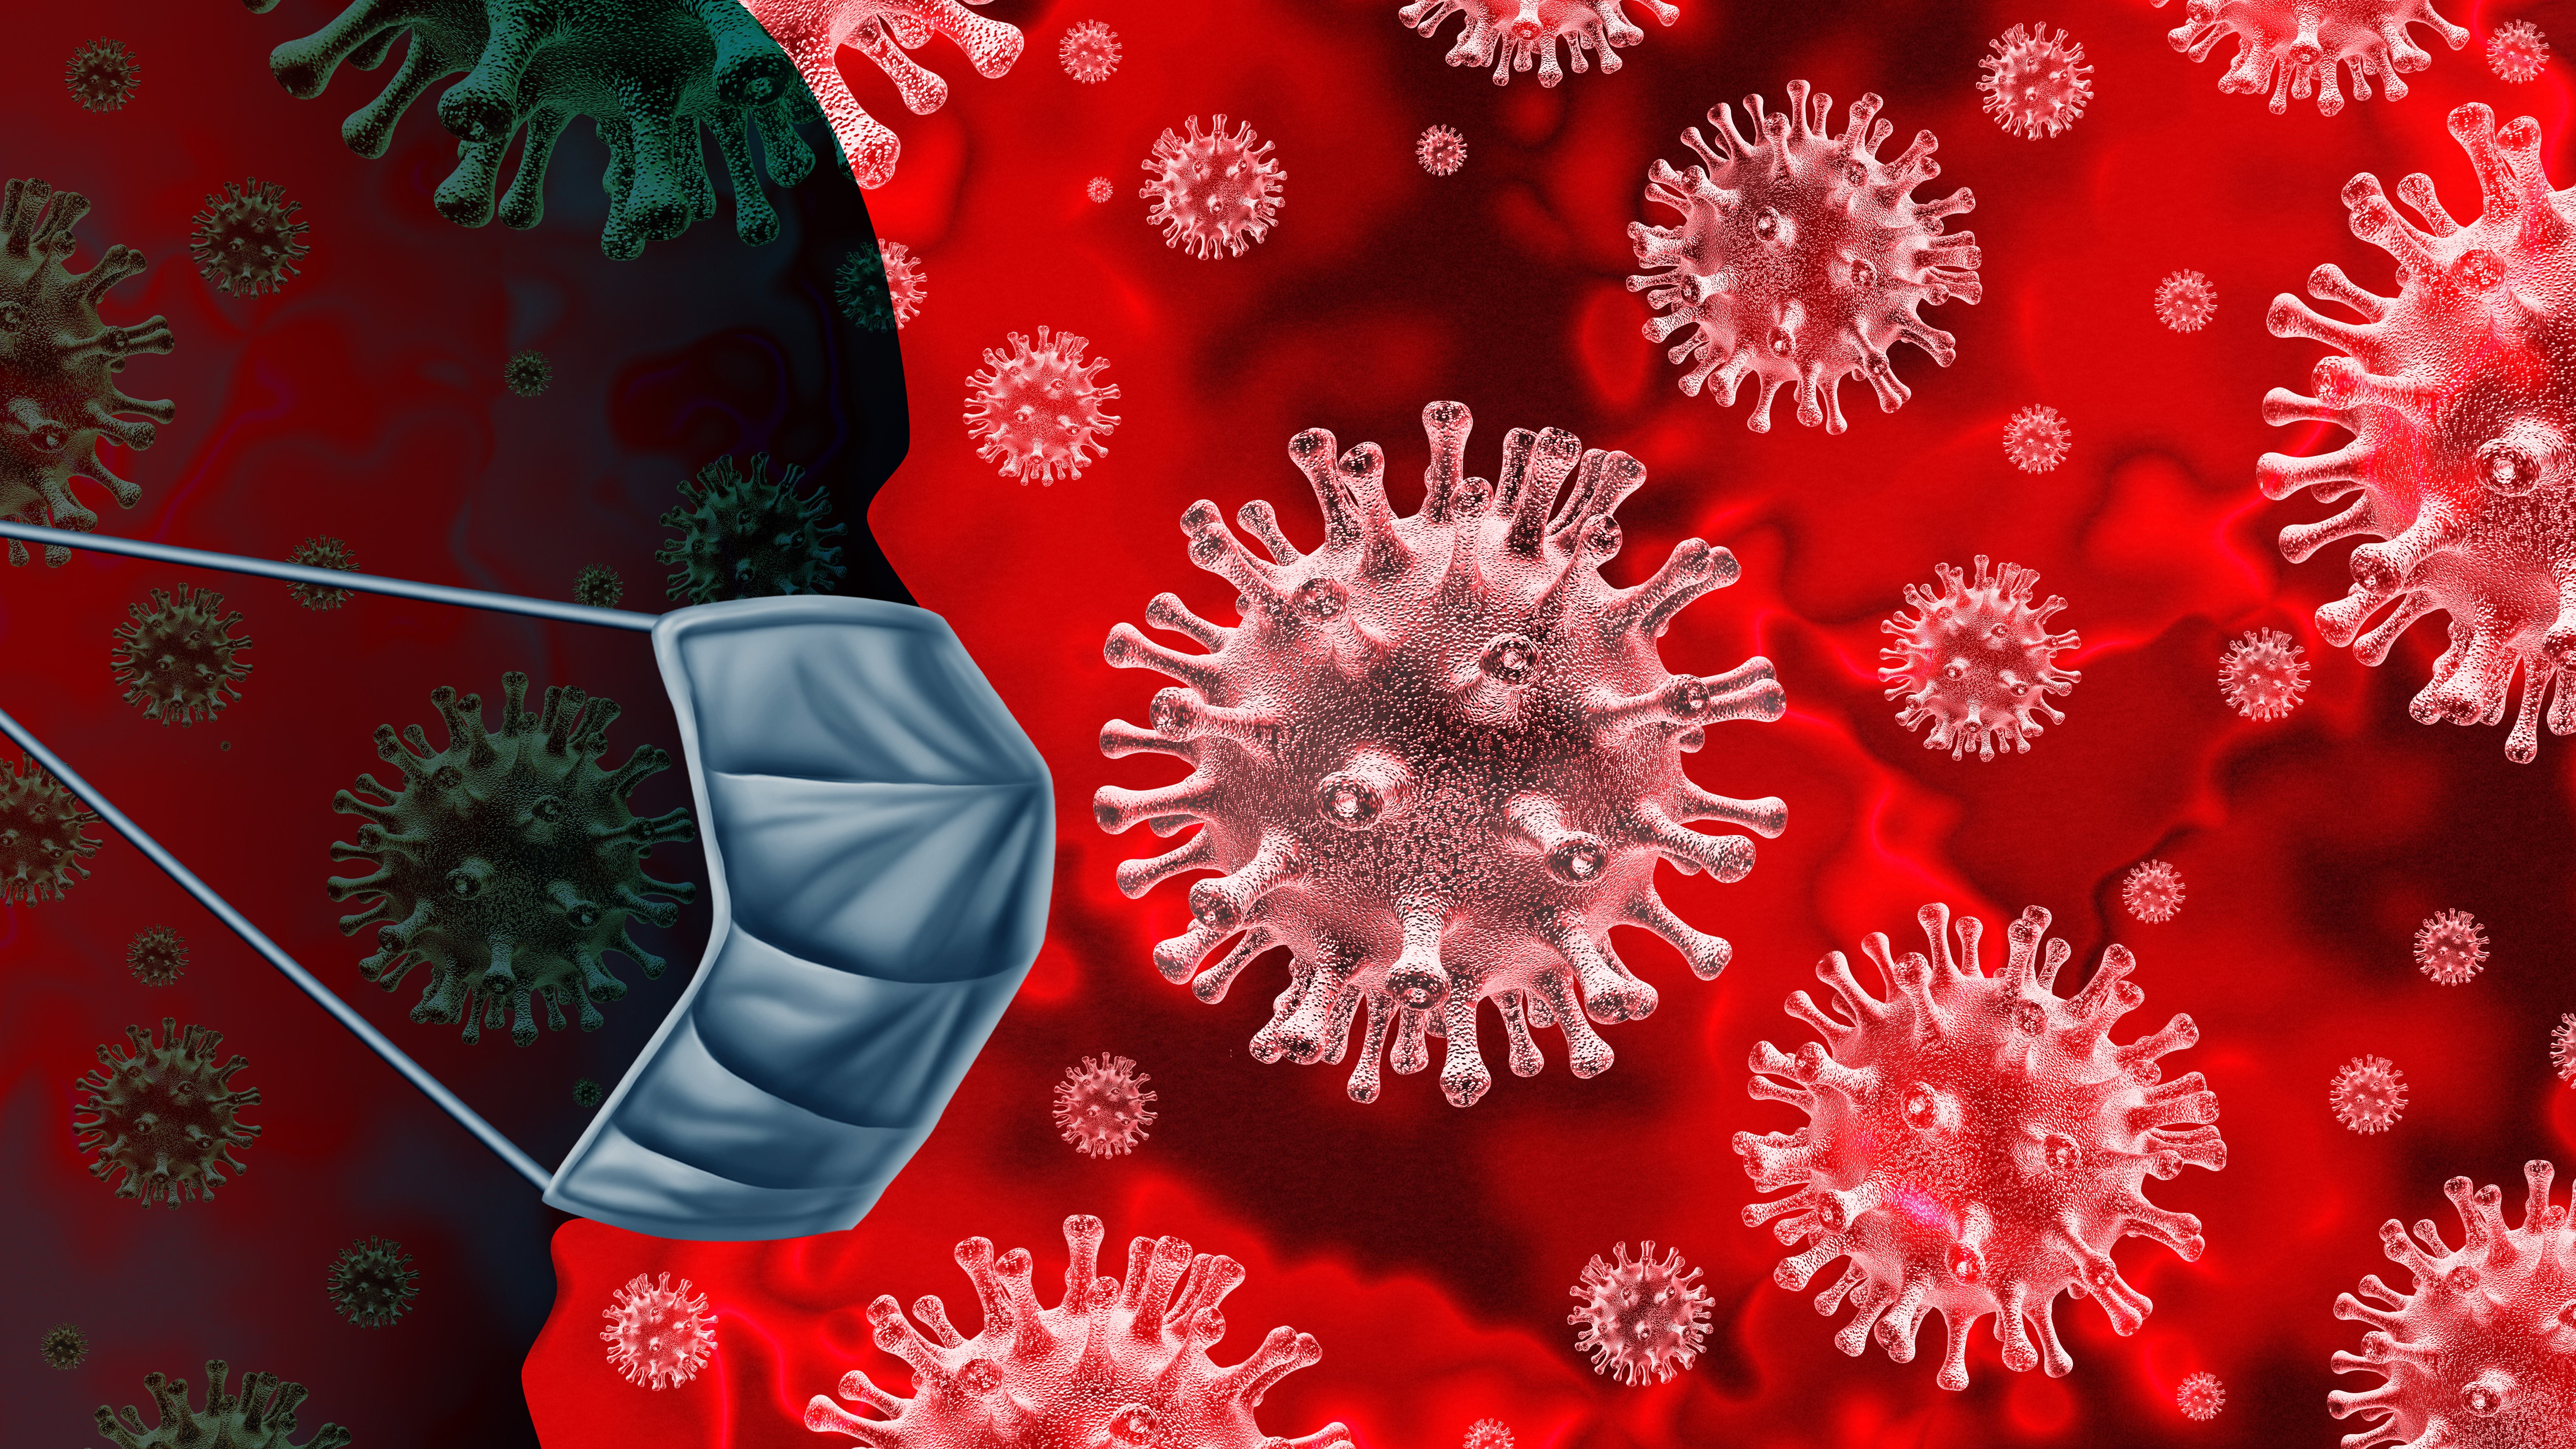 What We Know About The Coronavirus So Far